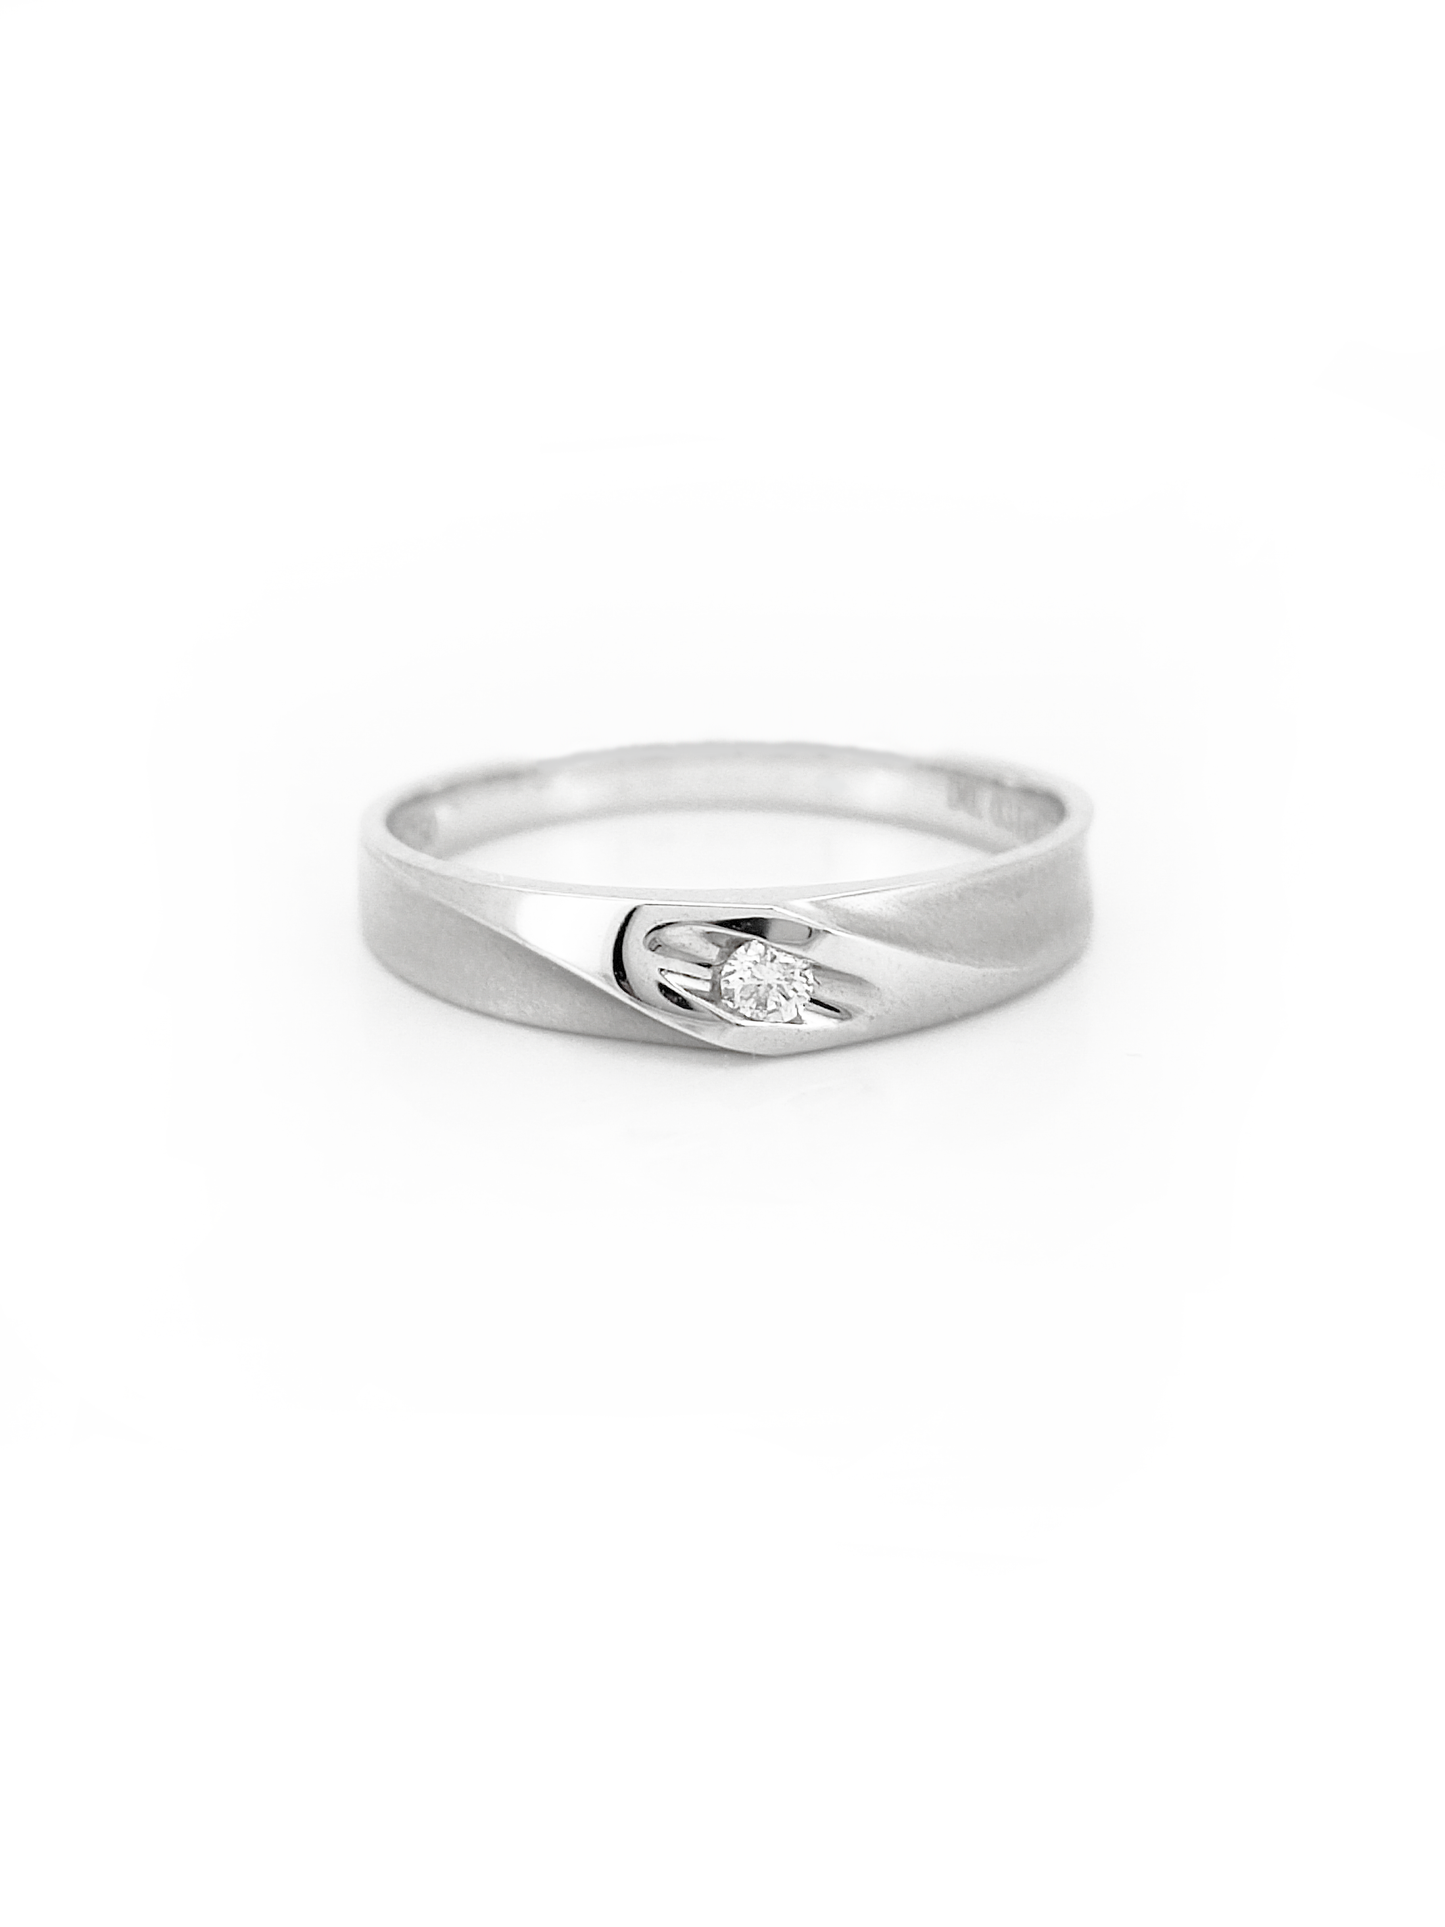 White Gold Ring With Diamond 0.031CT & 0.063CT